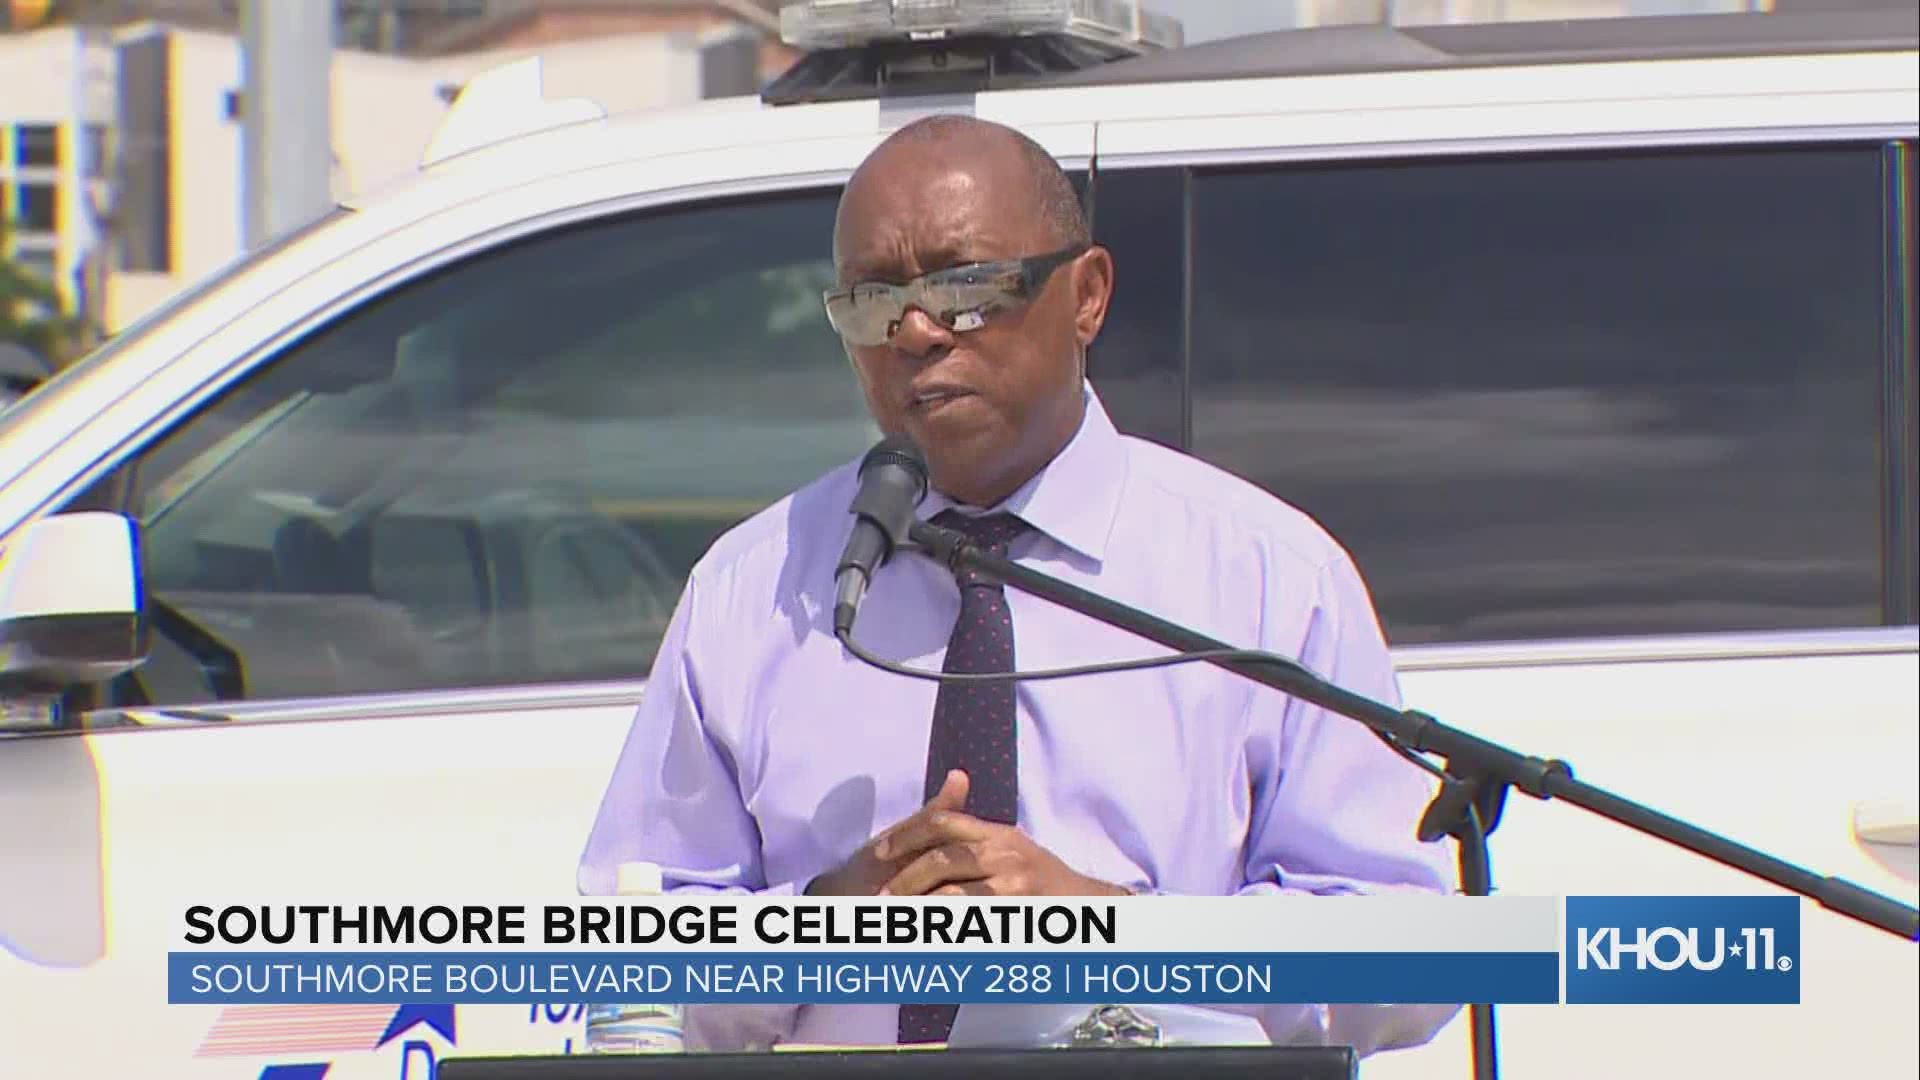 Houston Mayor Sylvester Turner says he is excited about the official completion of the Southmore Bridge after the structure was demolished nearly three years ago.